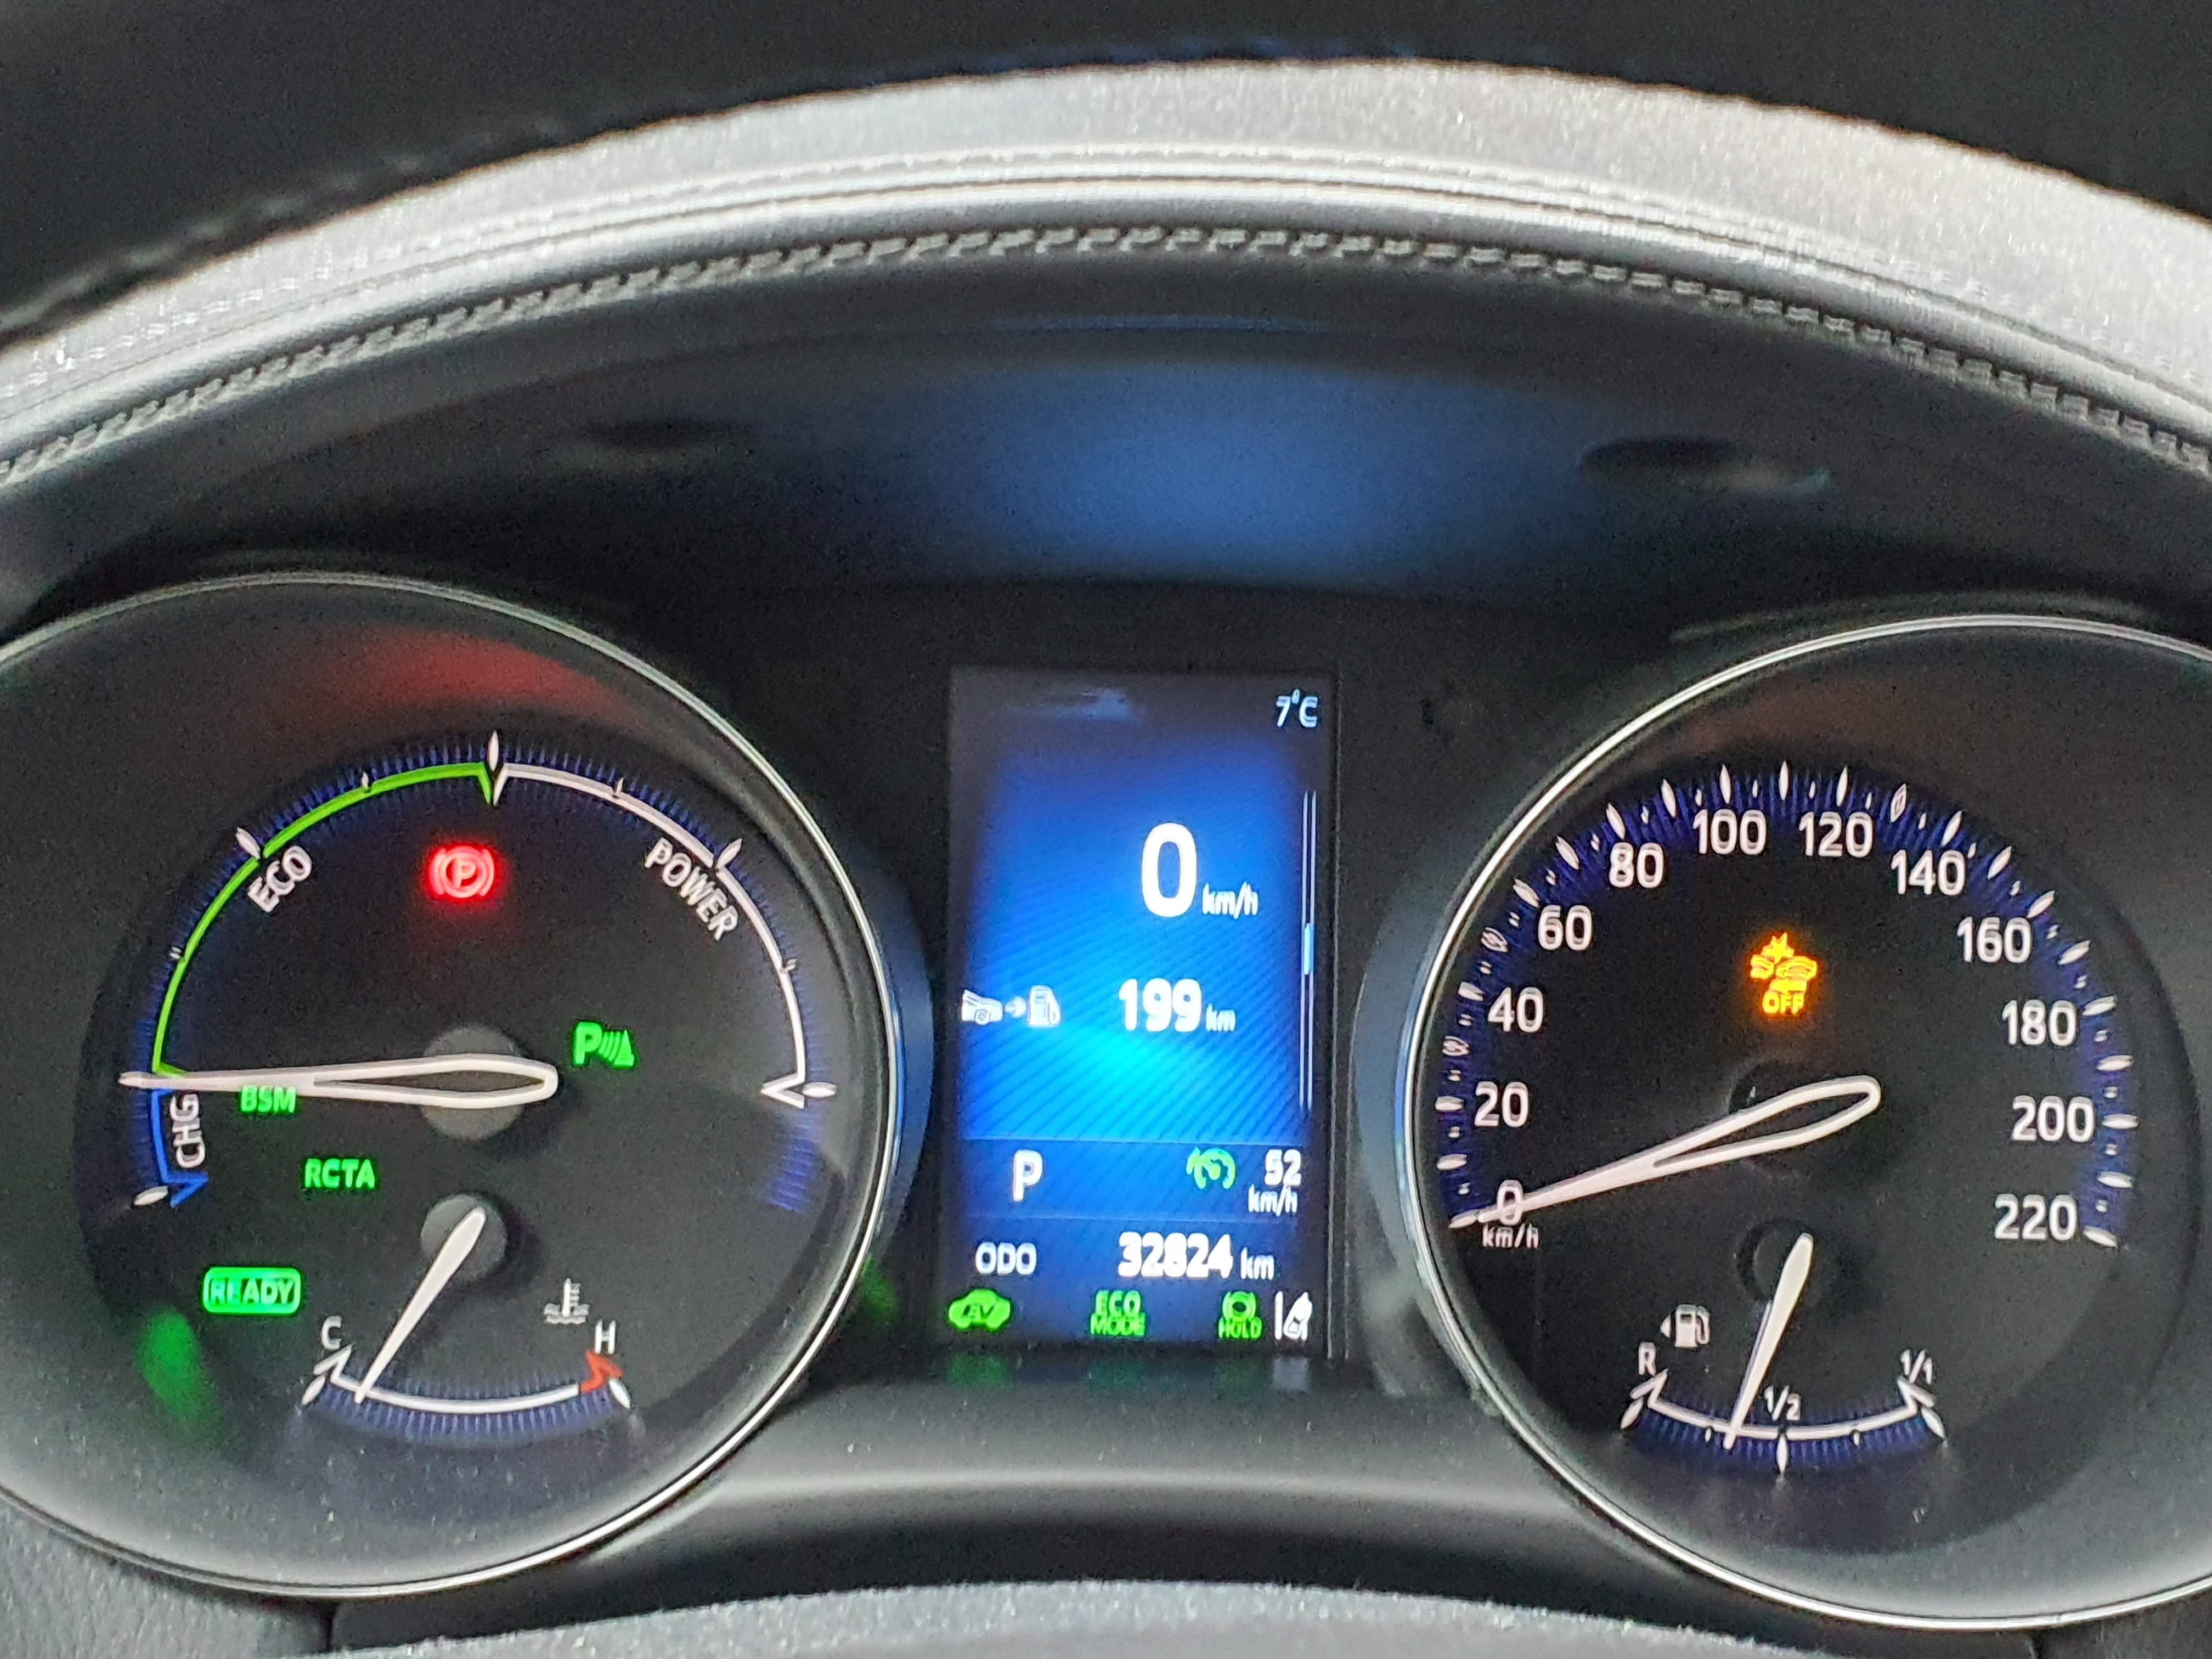 How to Turn Off/Remove Car Crash Warning On Dashboard 